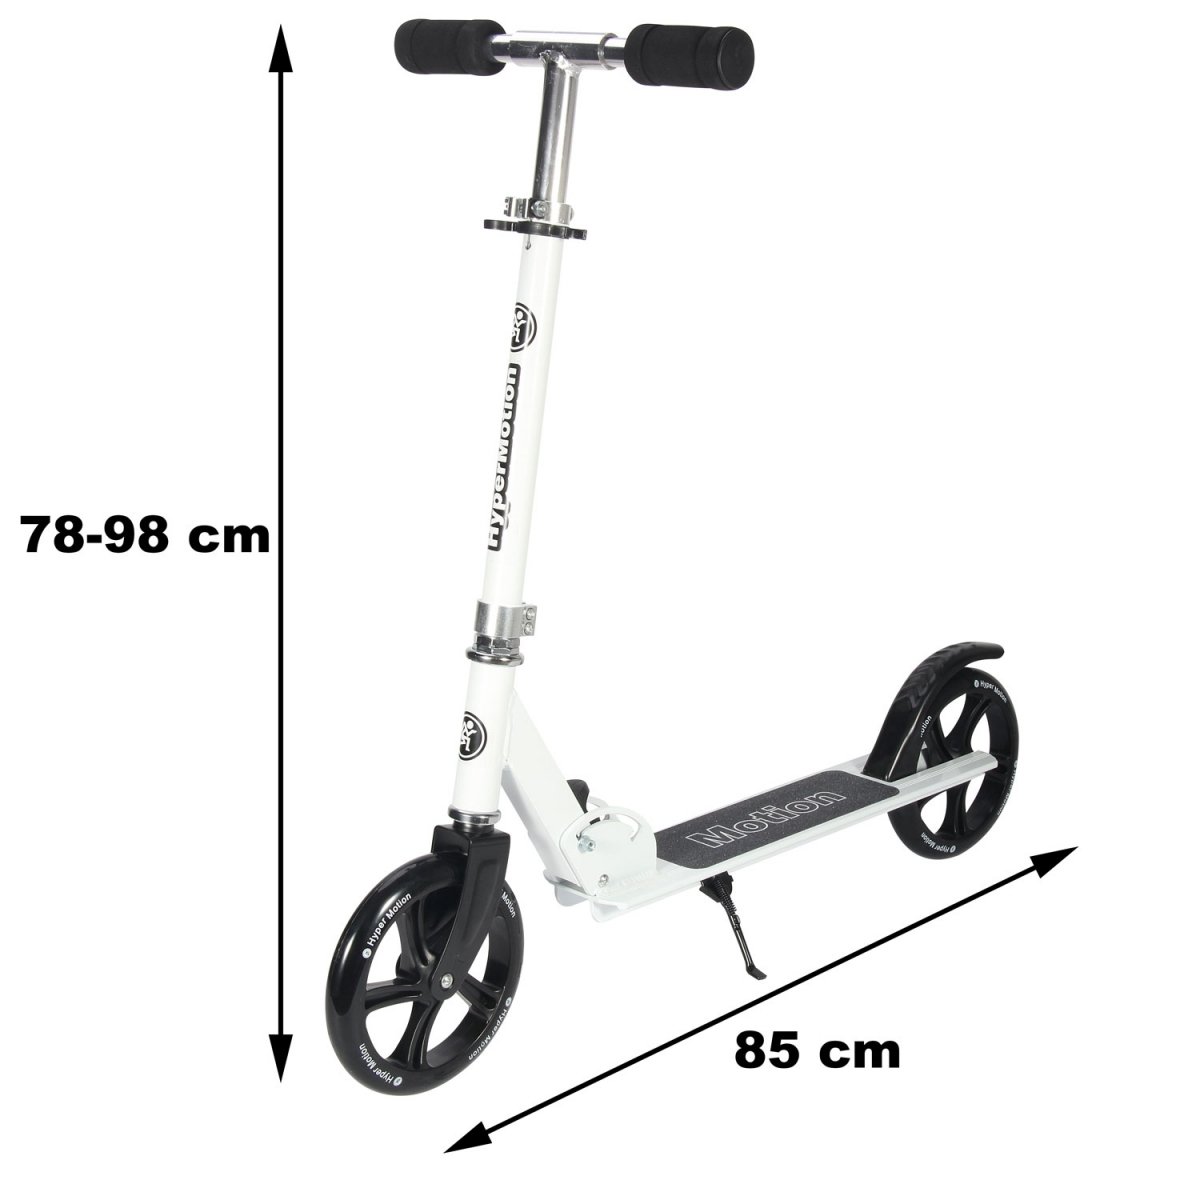 ROCKSTER scooter